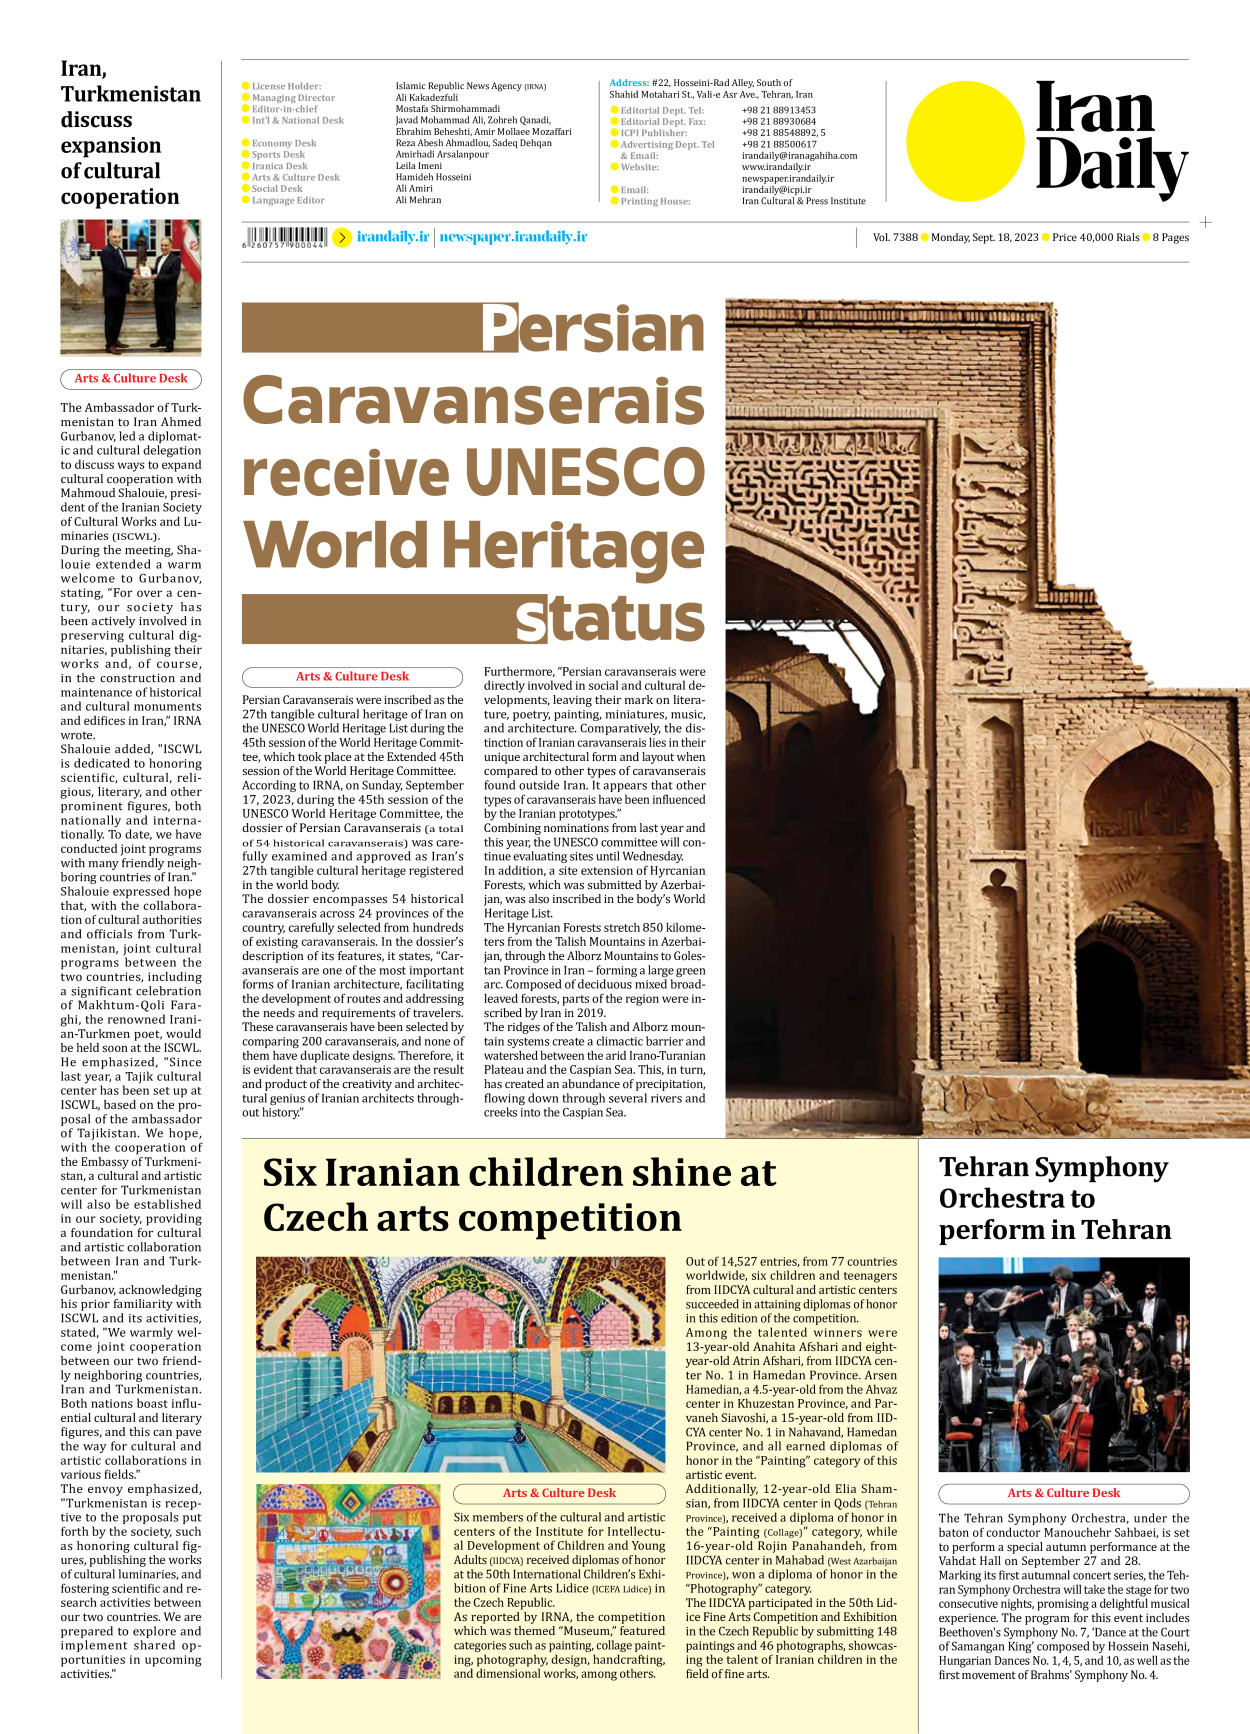 Iran Daily - Number Seven Thousand Three Hundred and Eighty Eight - 18 September 2023 - Page 8